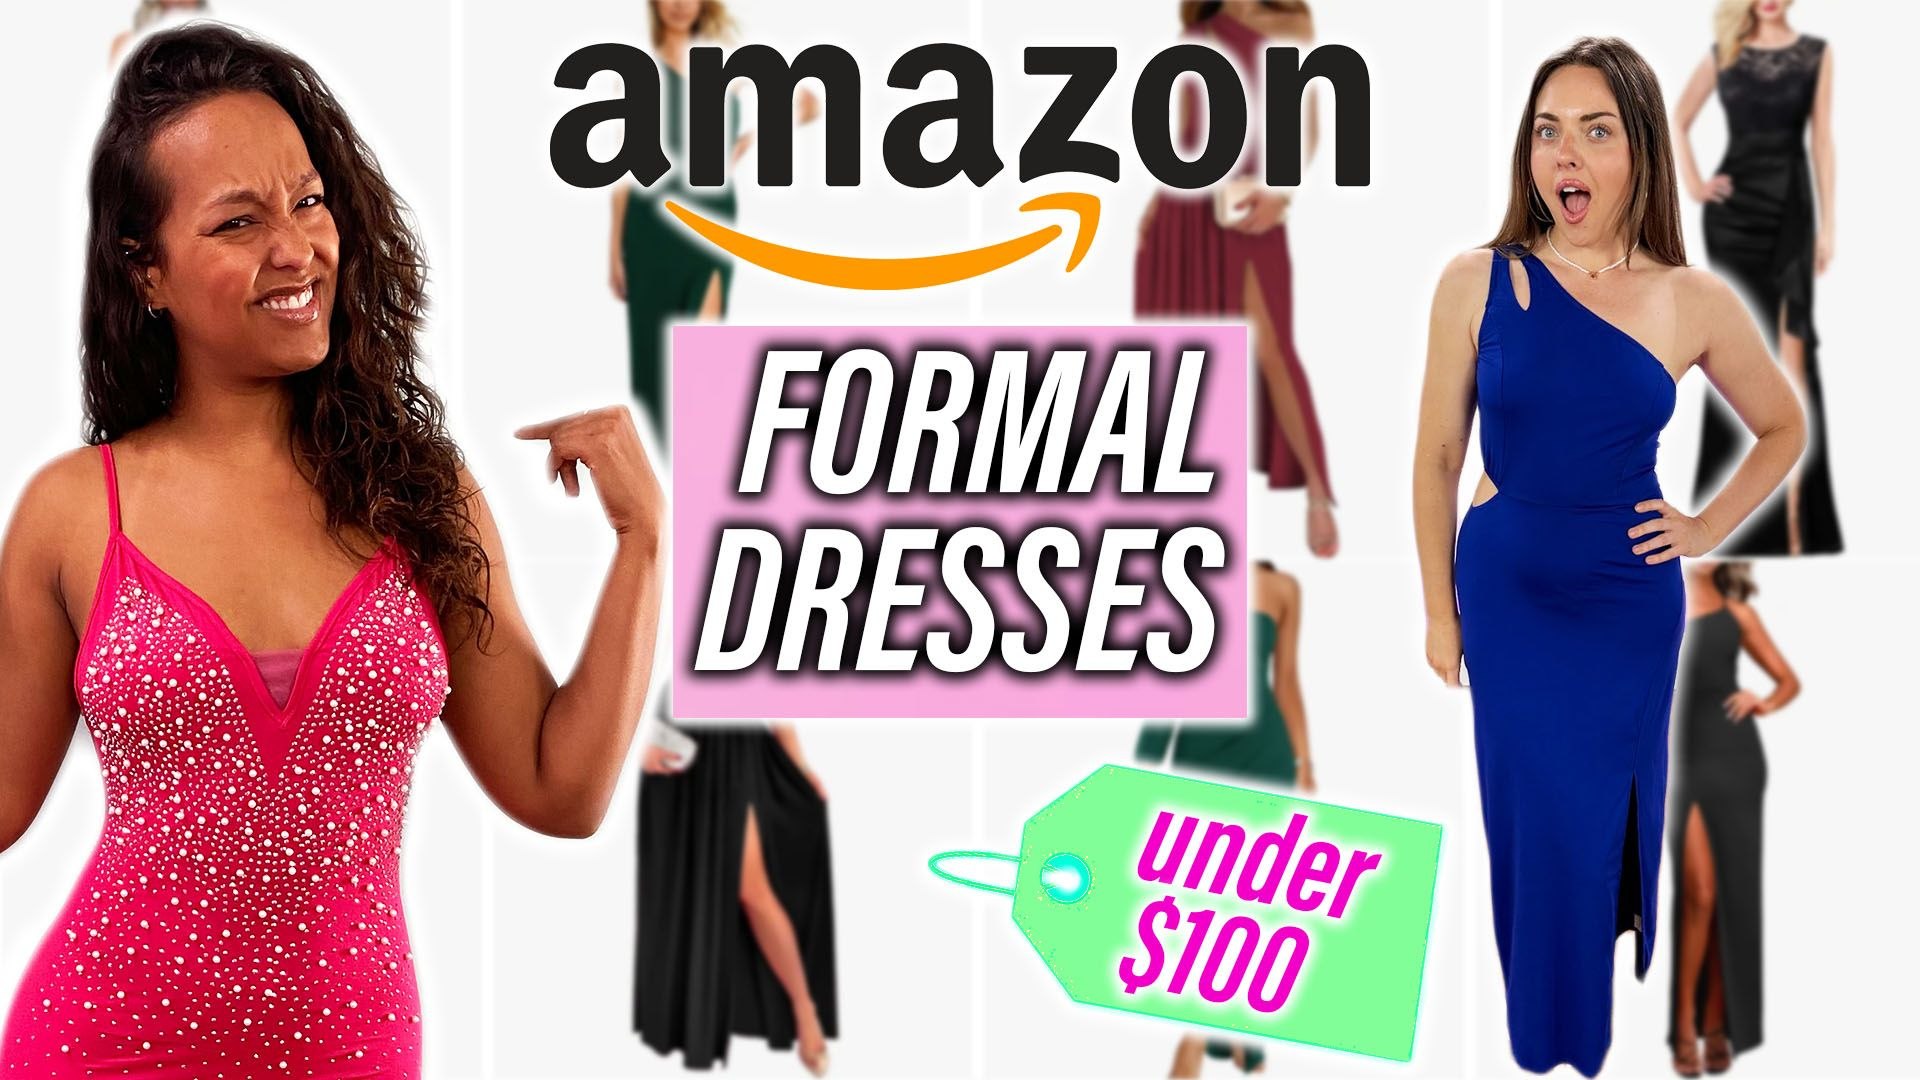 Reviewing Amazon Formal Dresses! under $100 - video Dailymotion